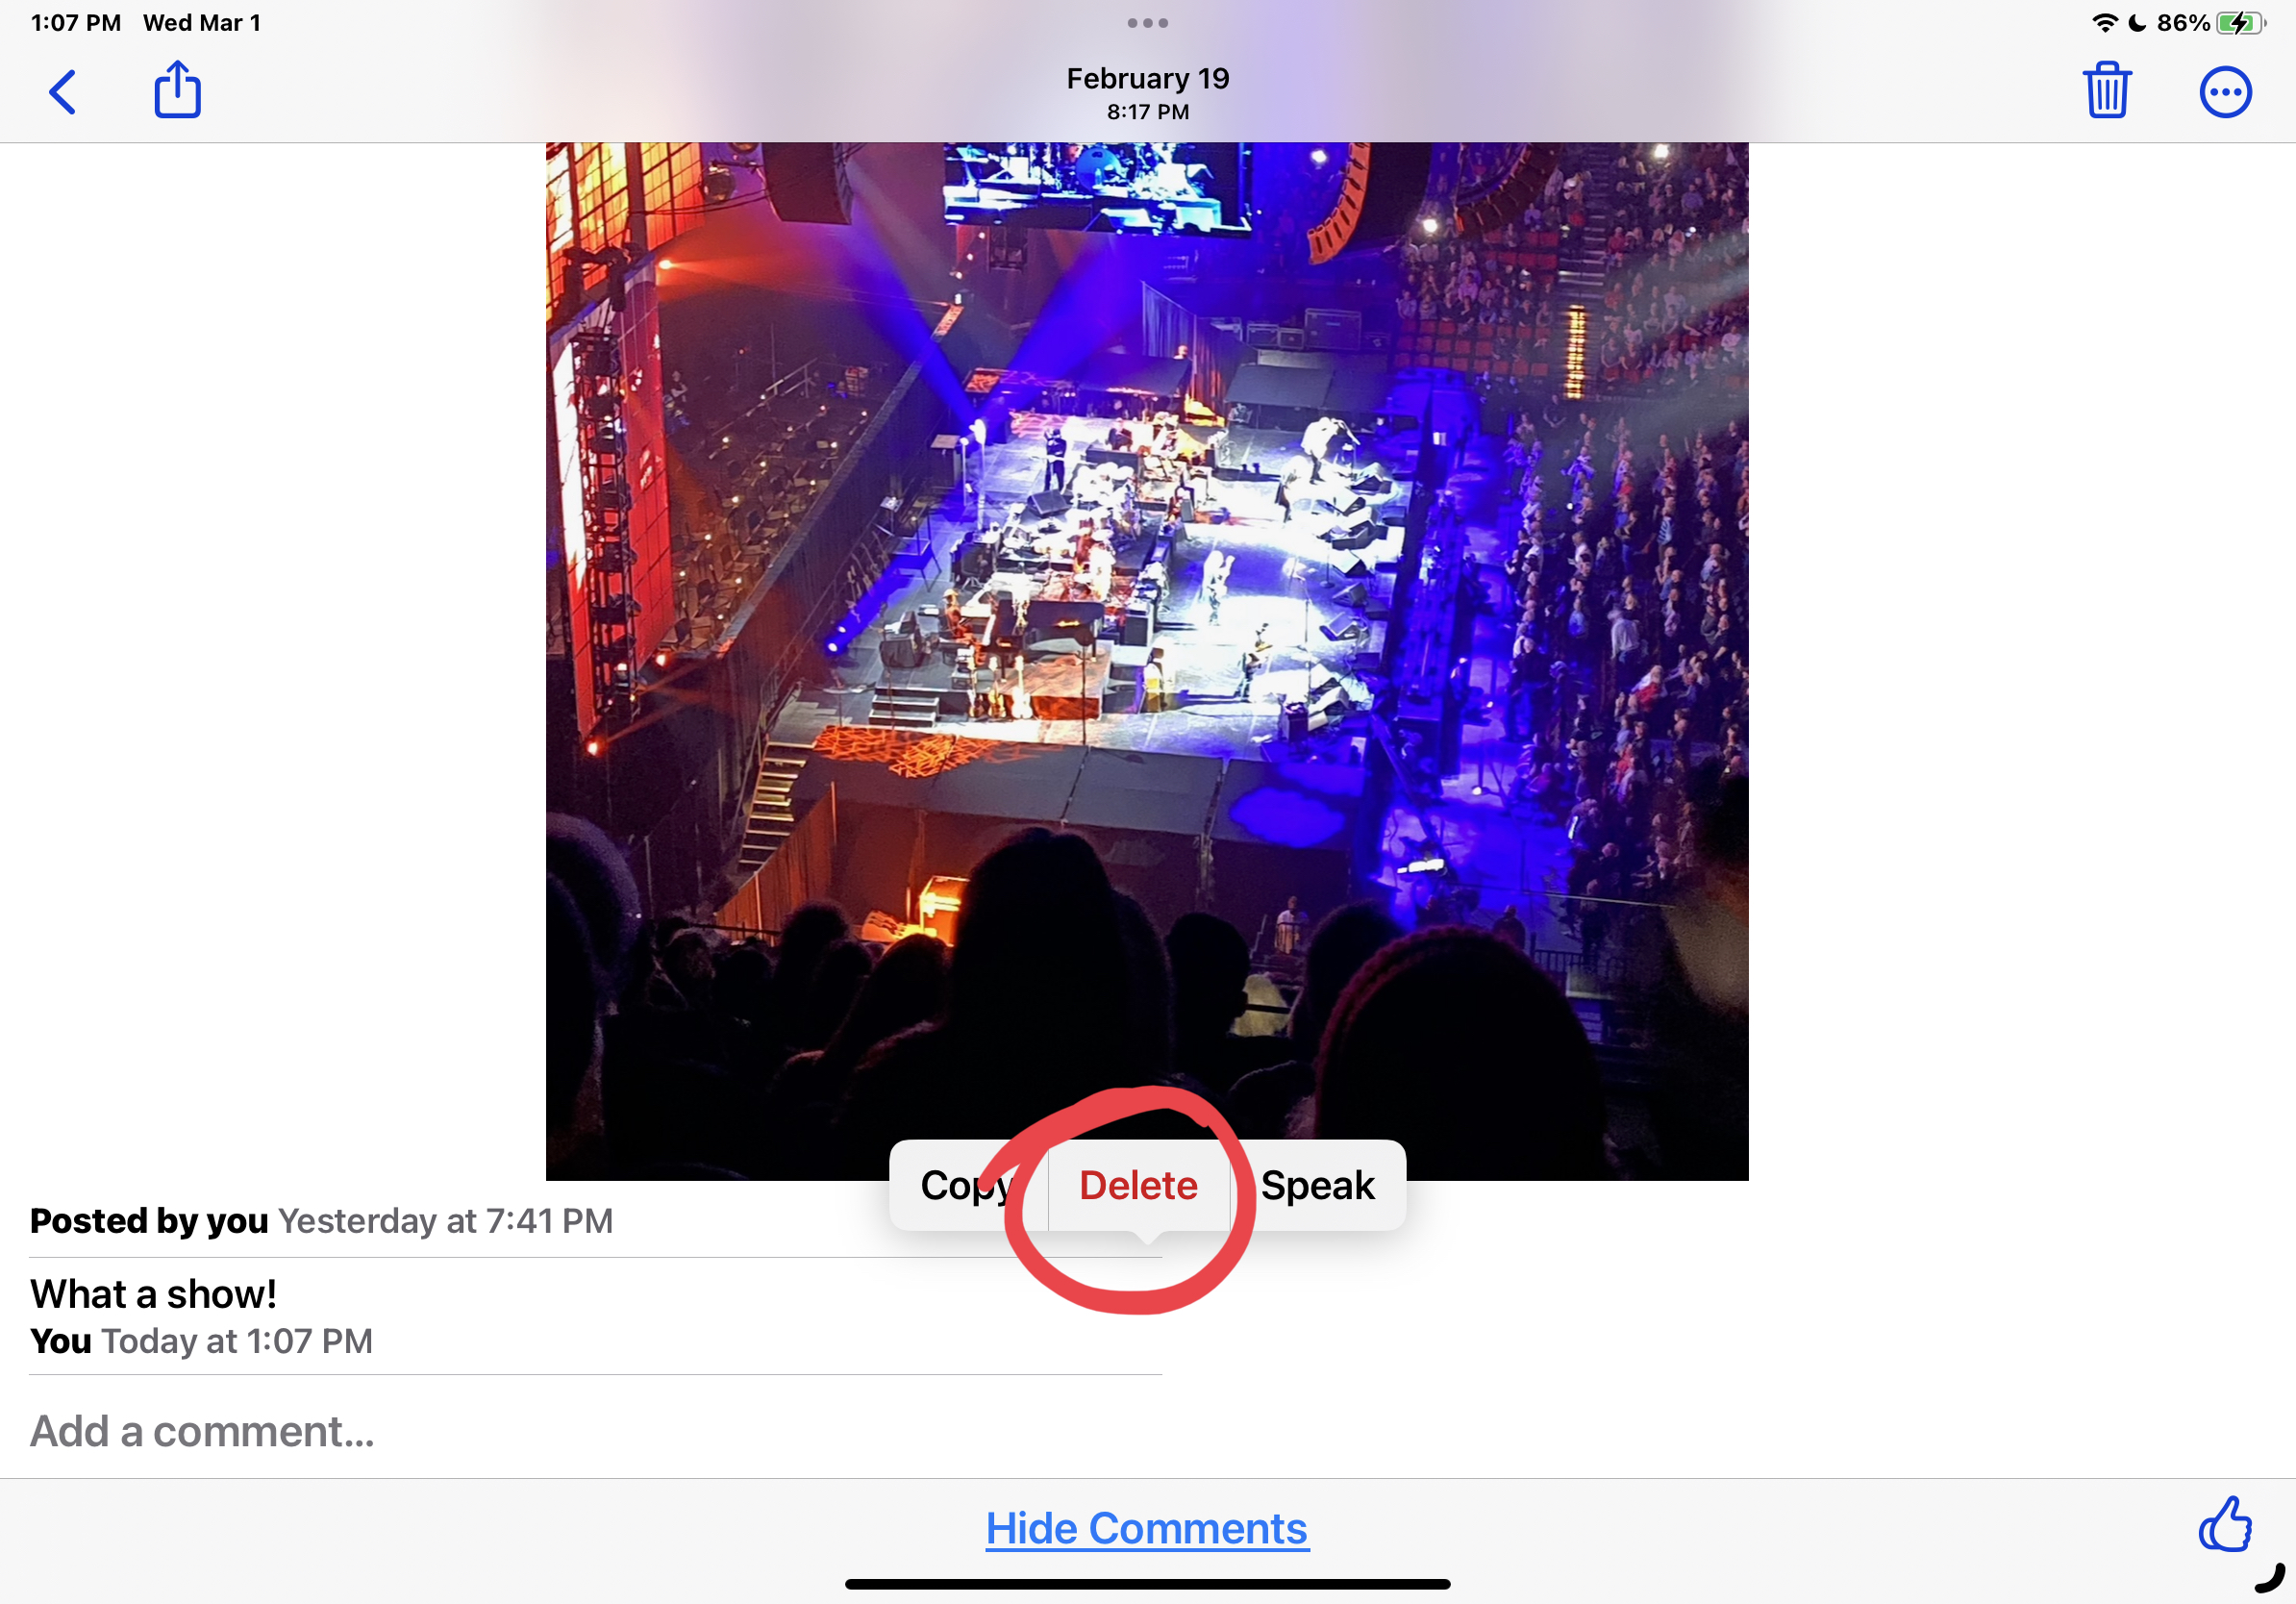 How to Delete Comments from Shared iCloud Photo Streams